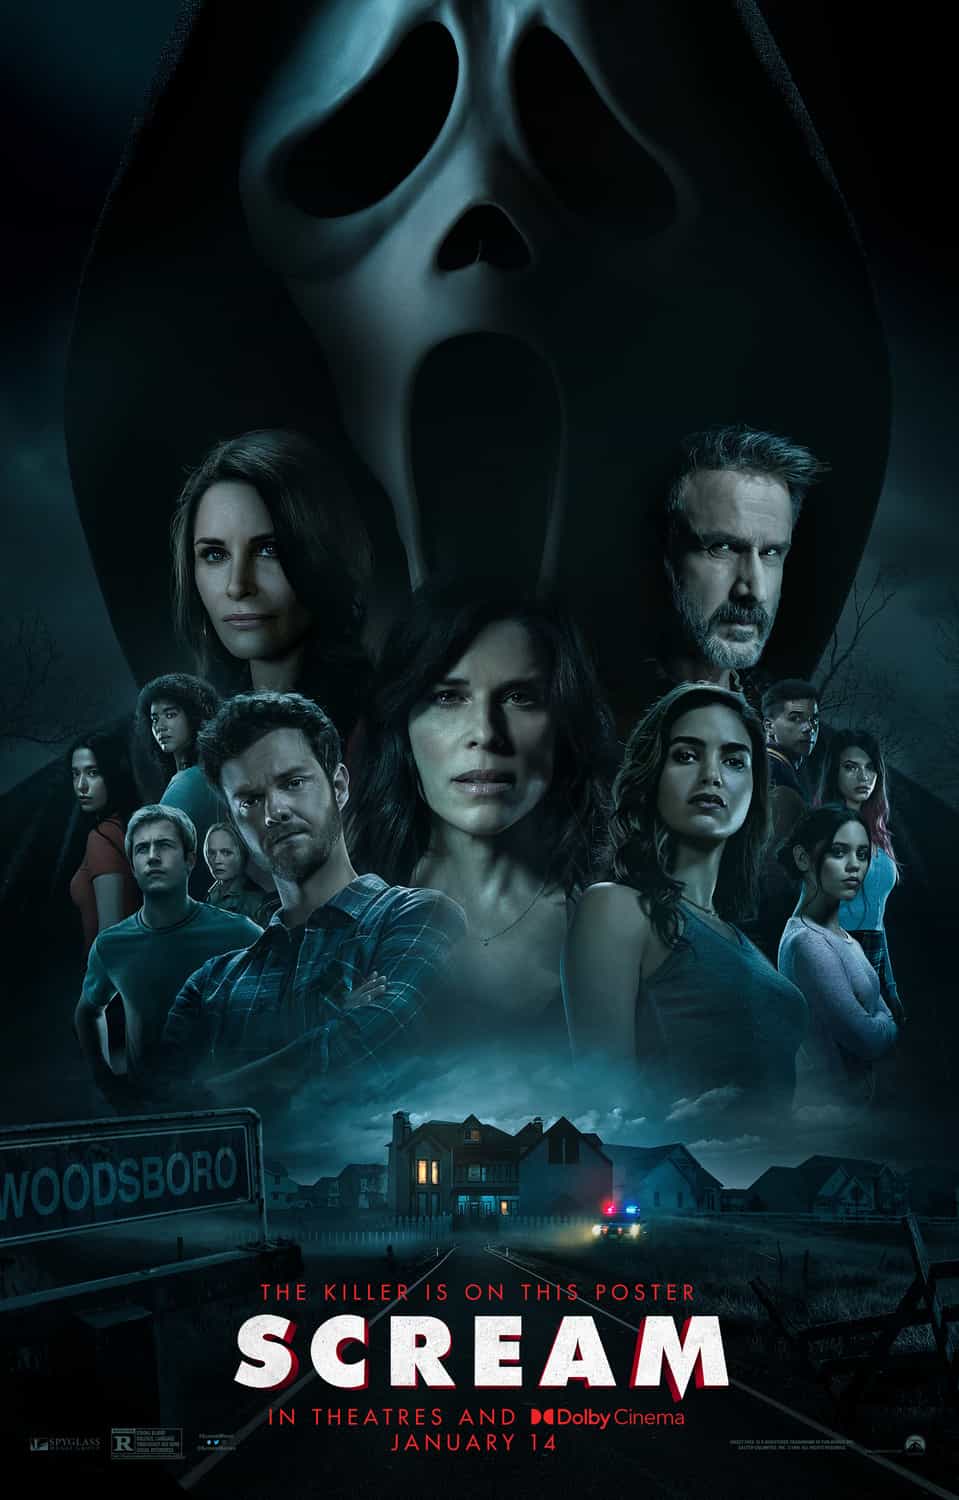 US Box Office Weekend Report 14th - 16th January 2022:  Scream on its debut takes over from Spider-Man at the top of the North American box office